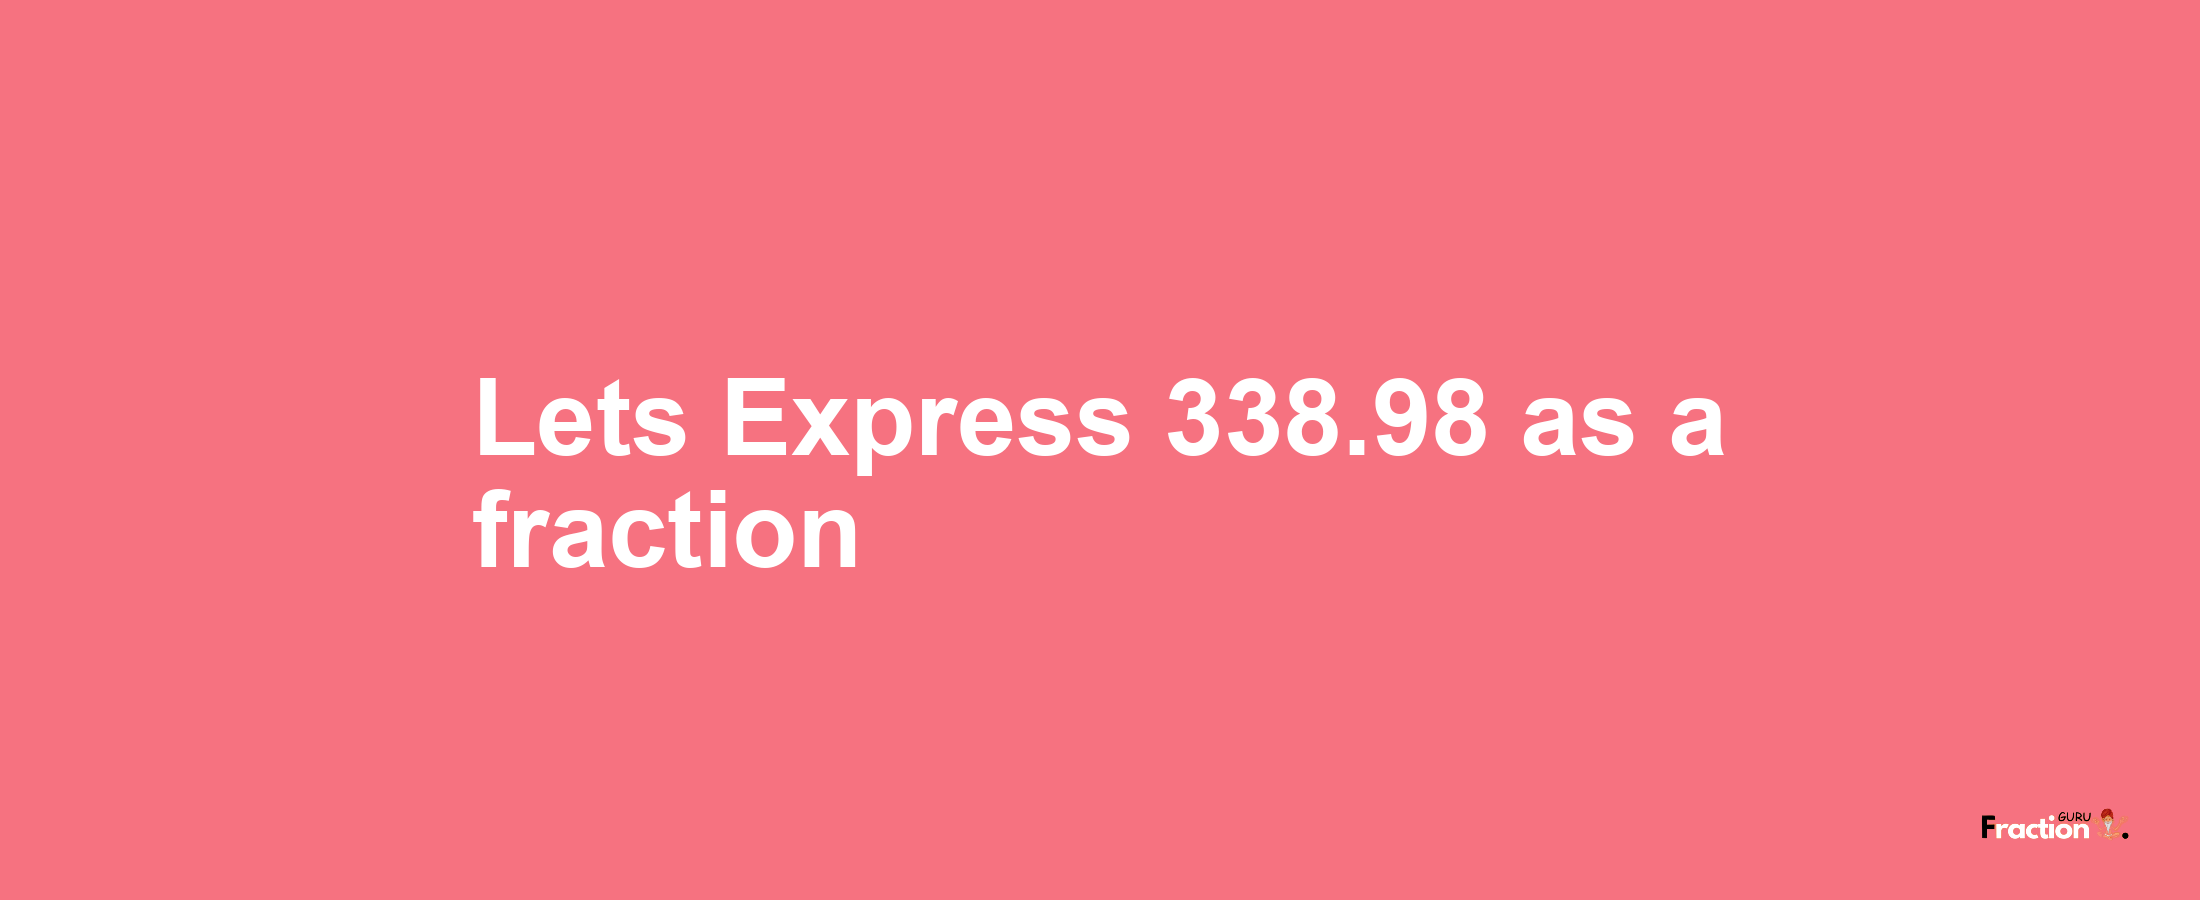 Lets Express 338.98 as afraction